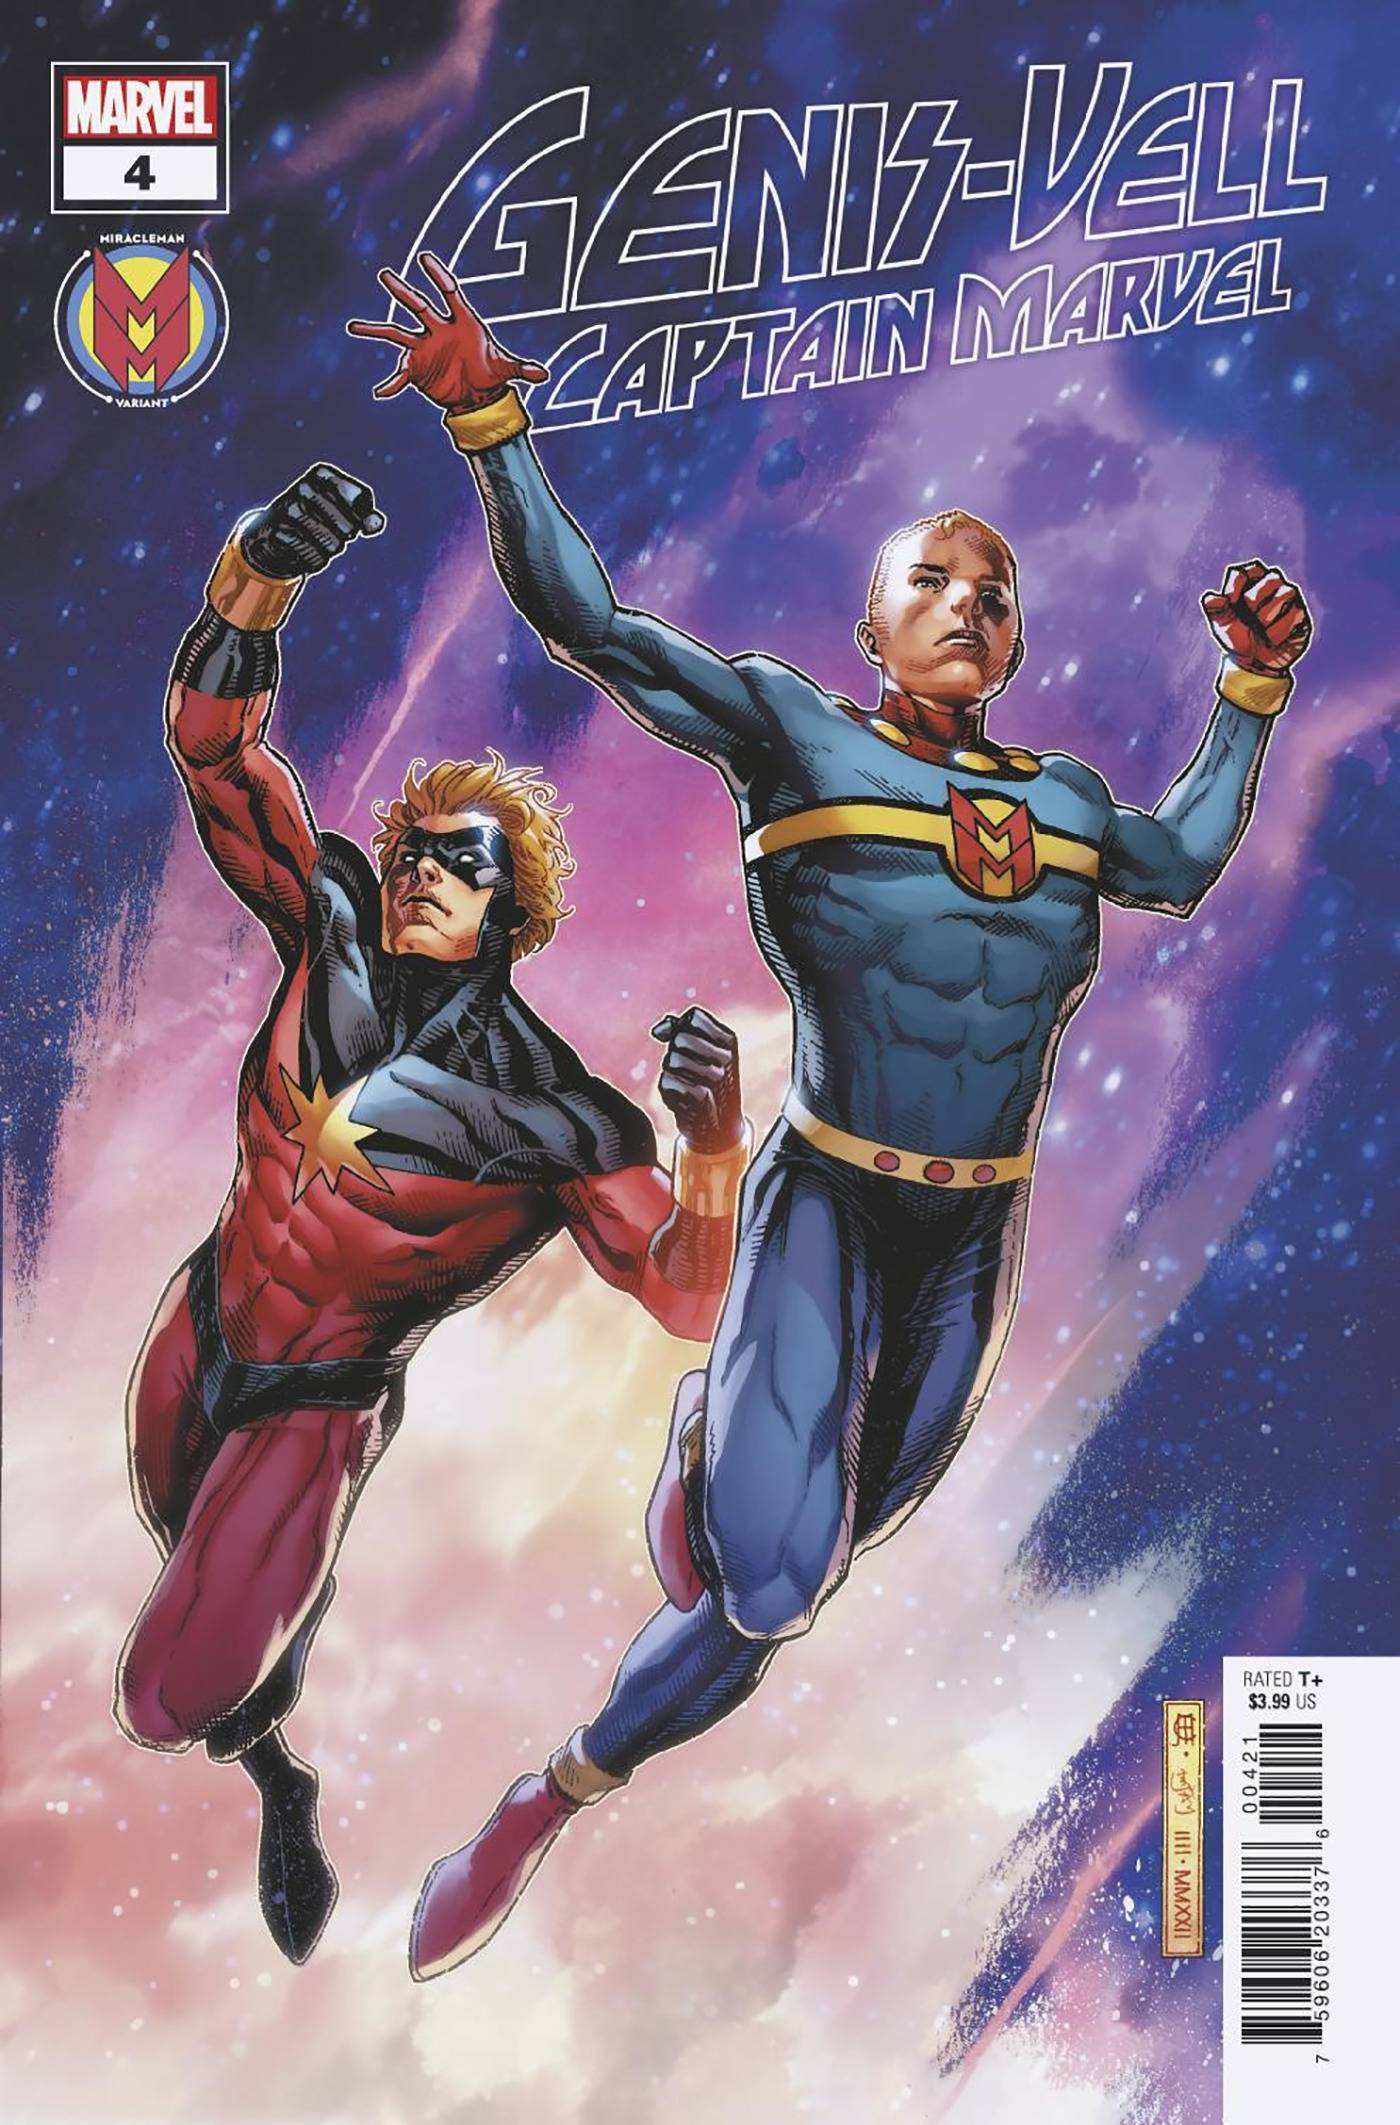 GENIS-VELL CAPTAIN MARVEL #4 (OF 5) CHEUNG MIRACLEMAN VAR